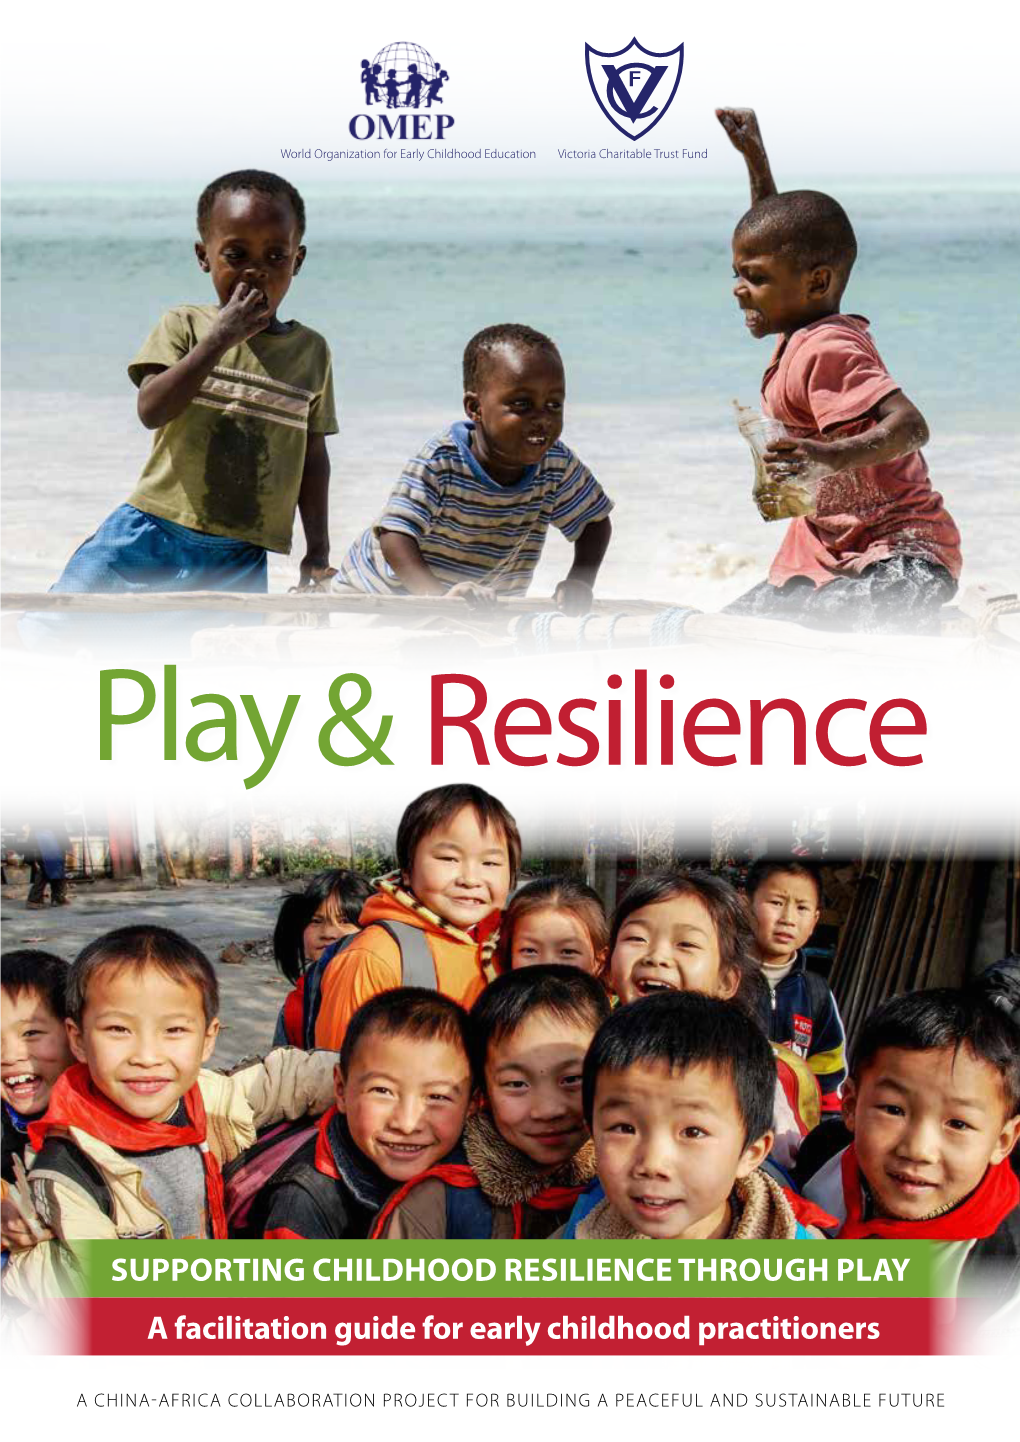 SUPPORTING CHILDHOOD RESILIENCE THROUGH PLAY a Facilitation Guide for Early Childhood Practitioners